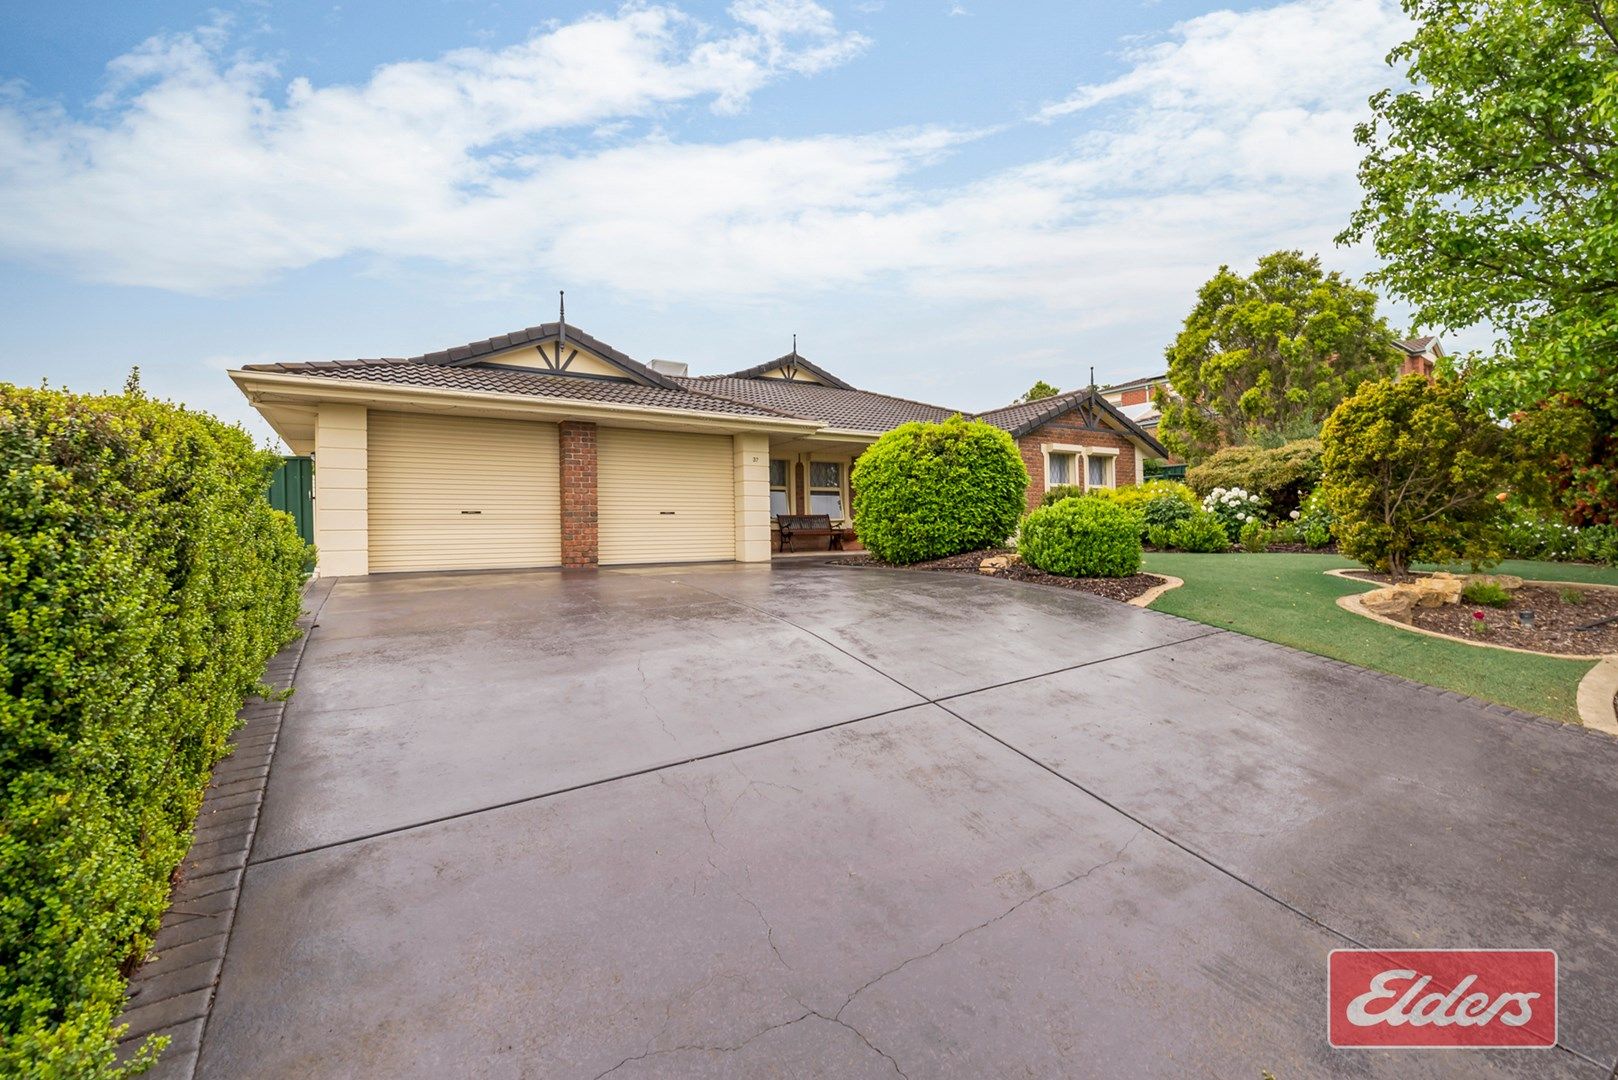 37 William Dyer Drive, Williamstown SA 5351, Image 0